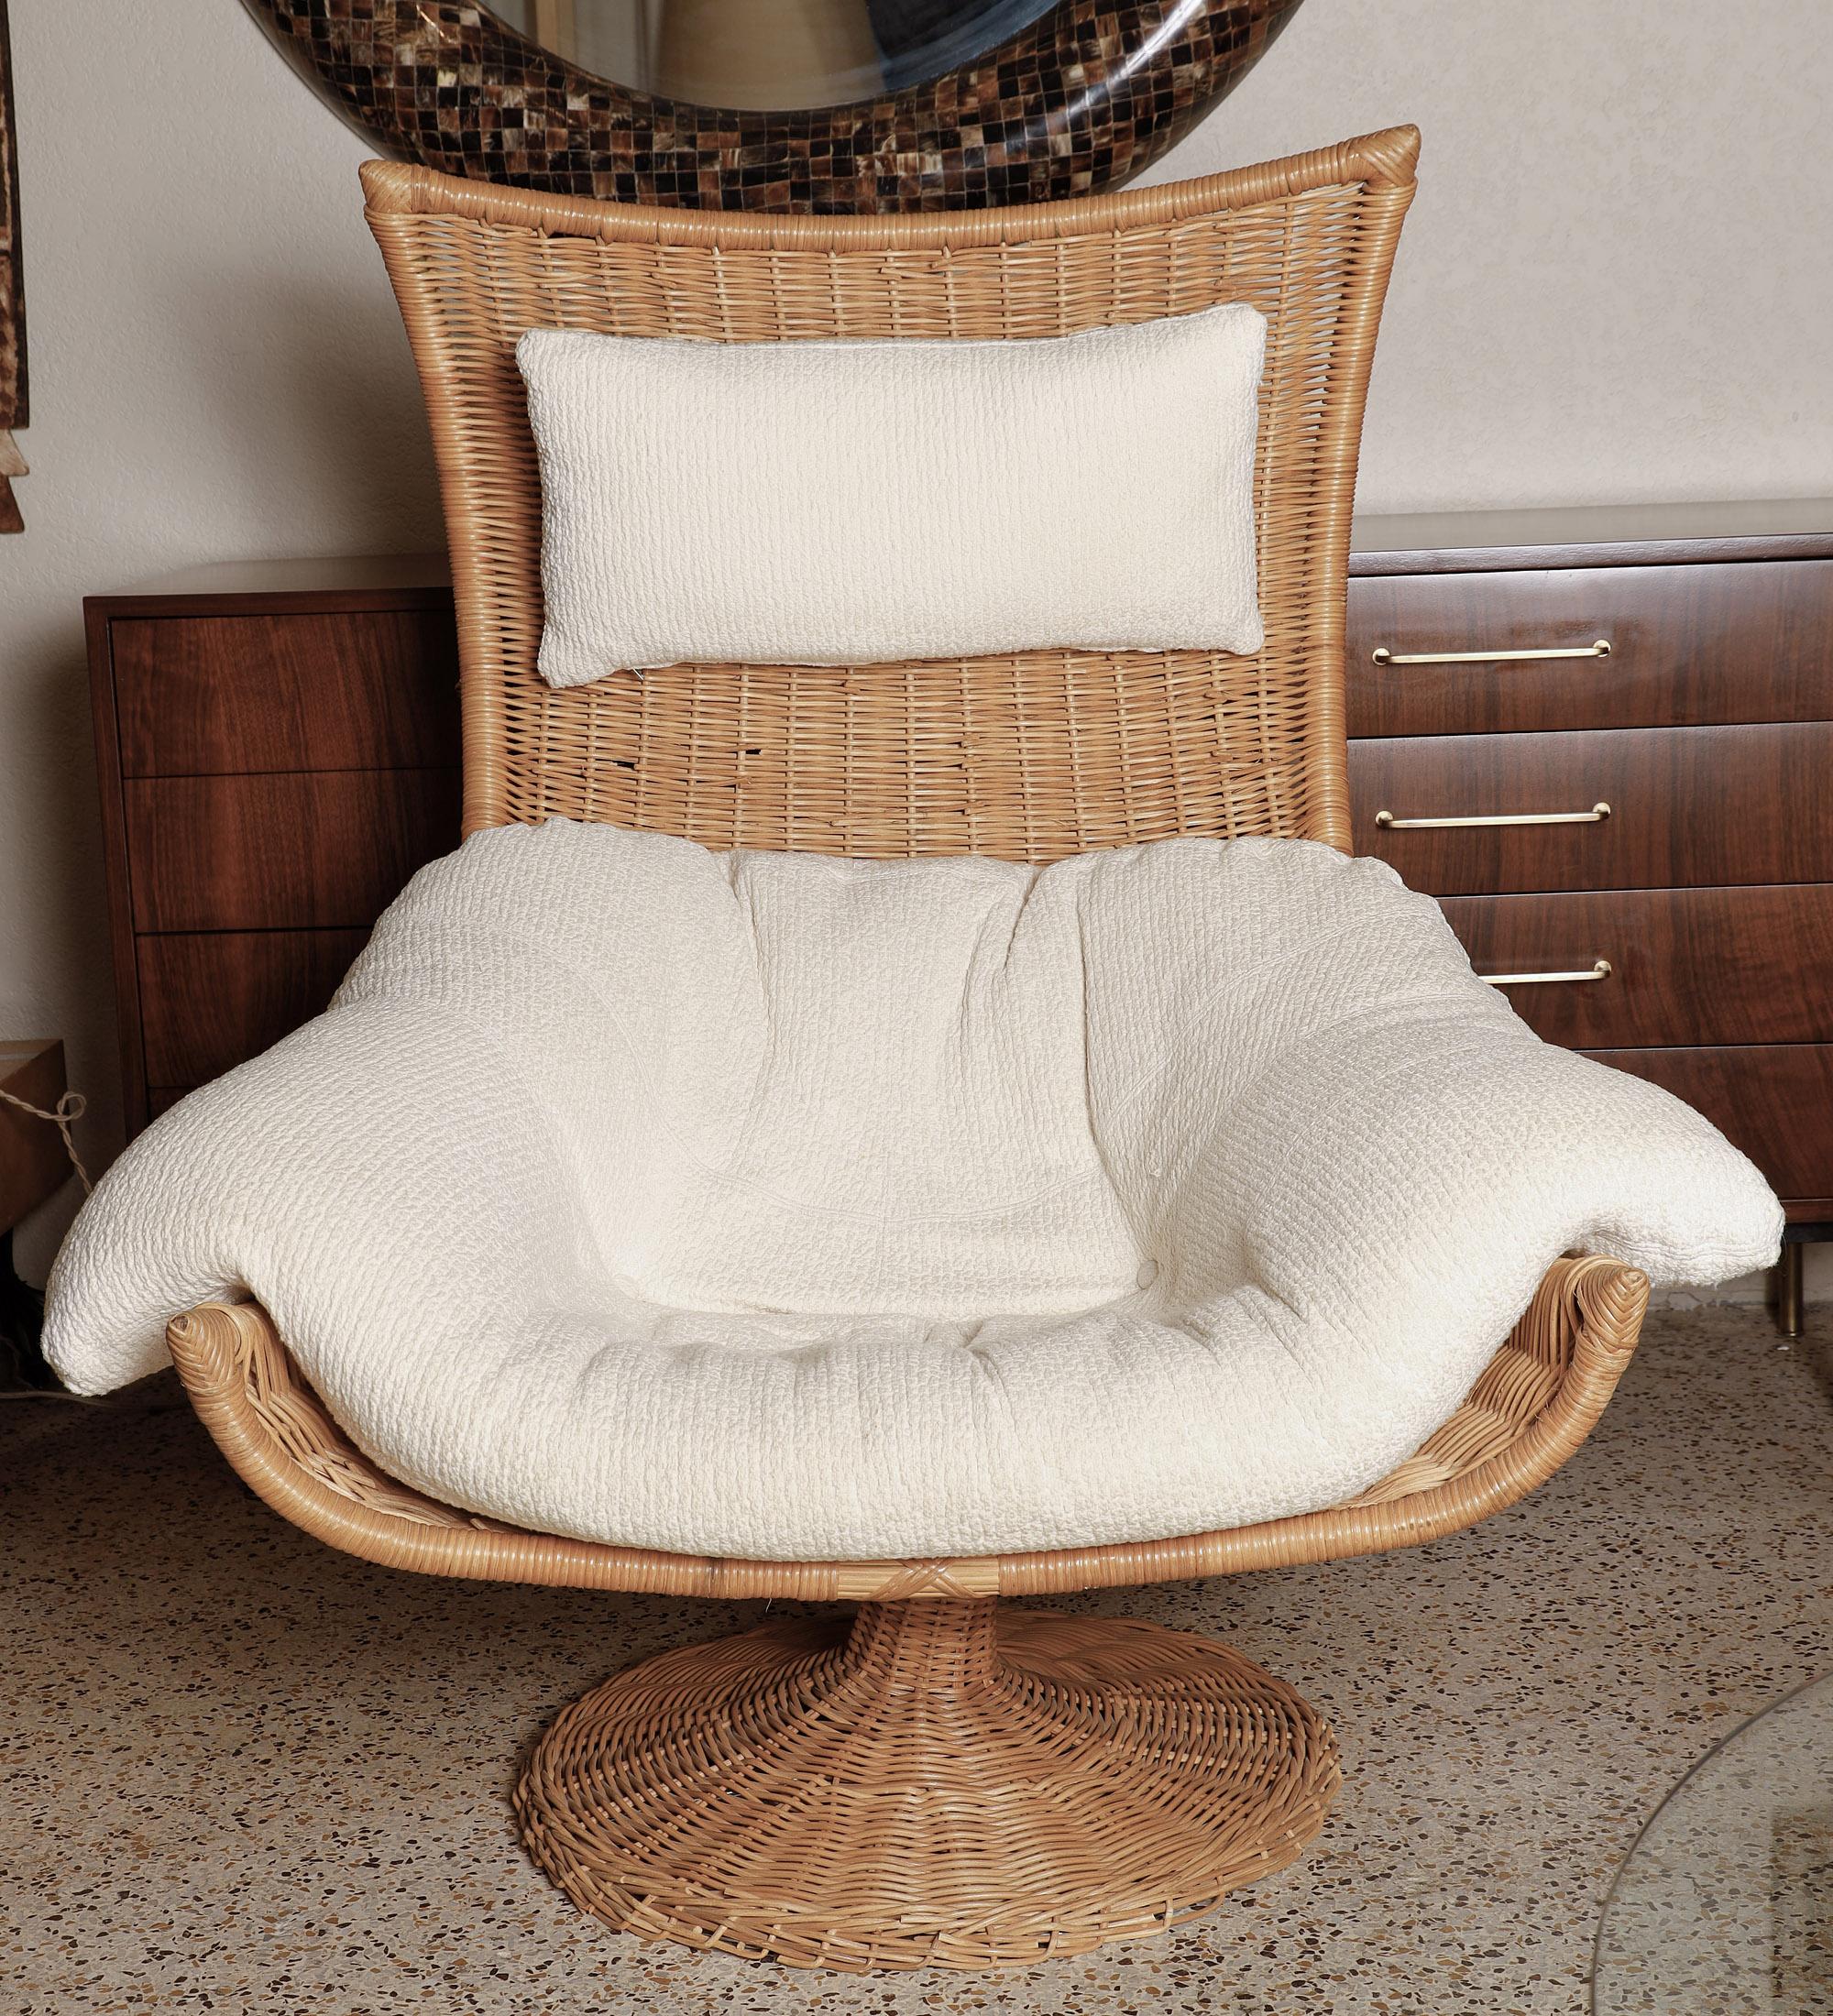 1970s Gerard van den Berg mid-century swivel lounge chair for Montis in
 natural woven rattan and white textured fabric seat and head rest.

Chic and organic !